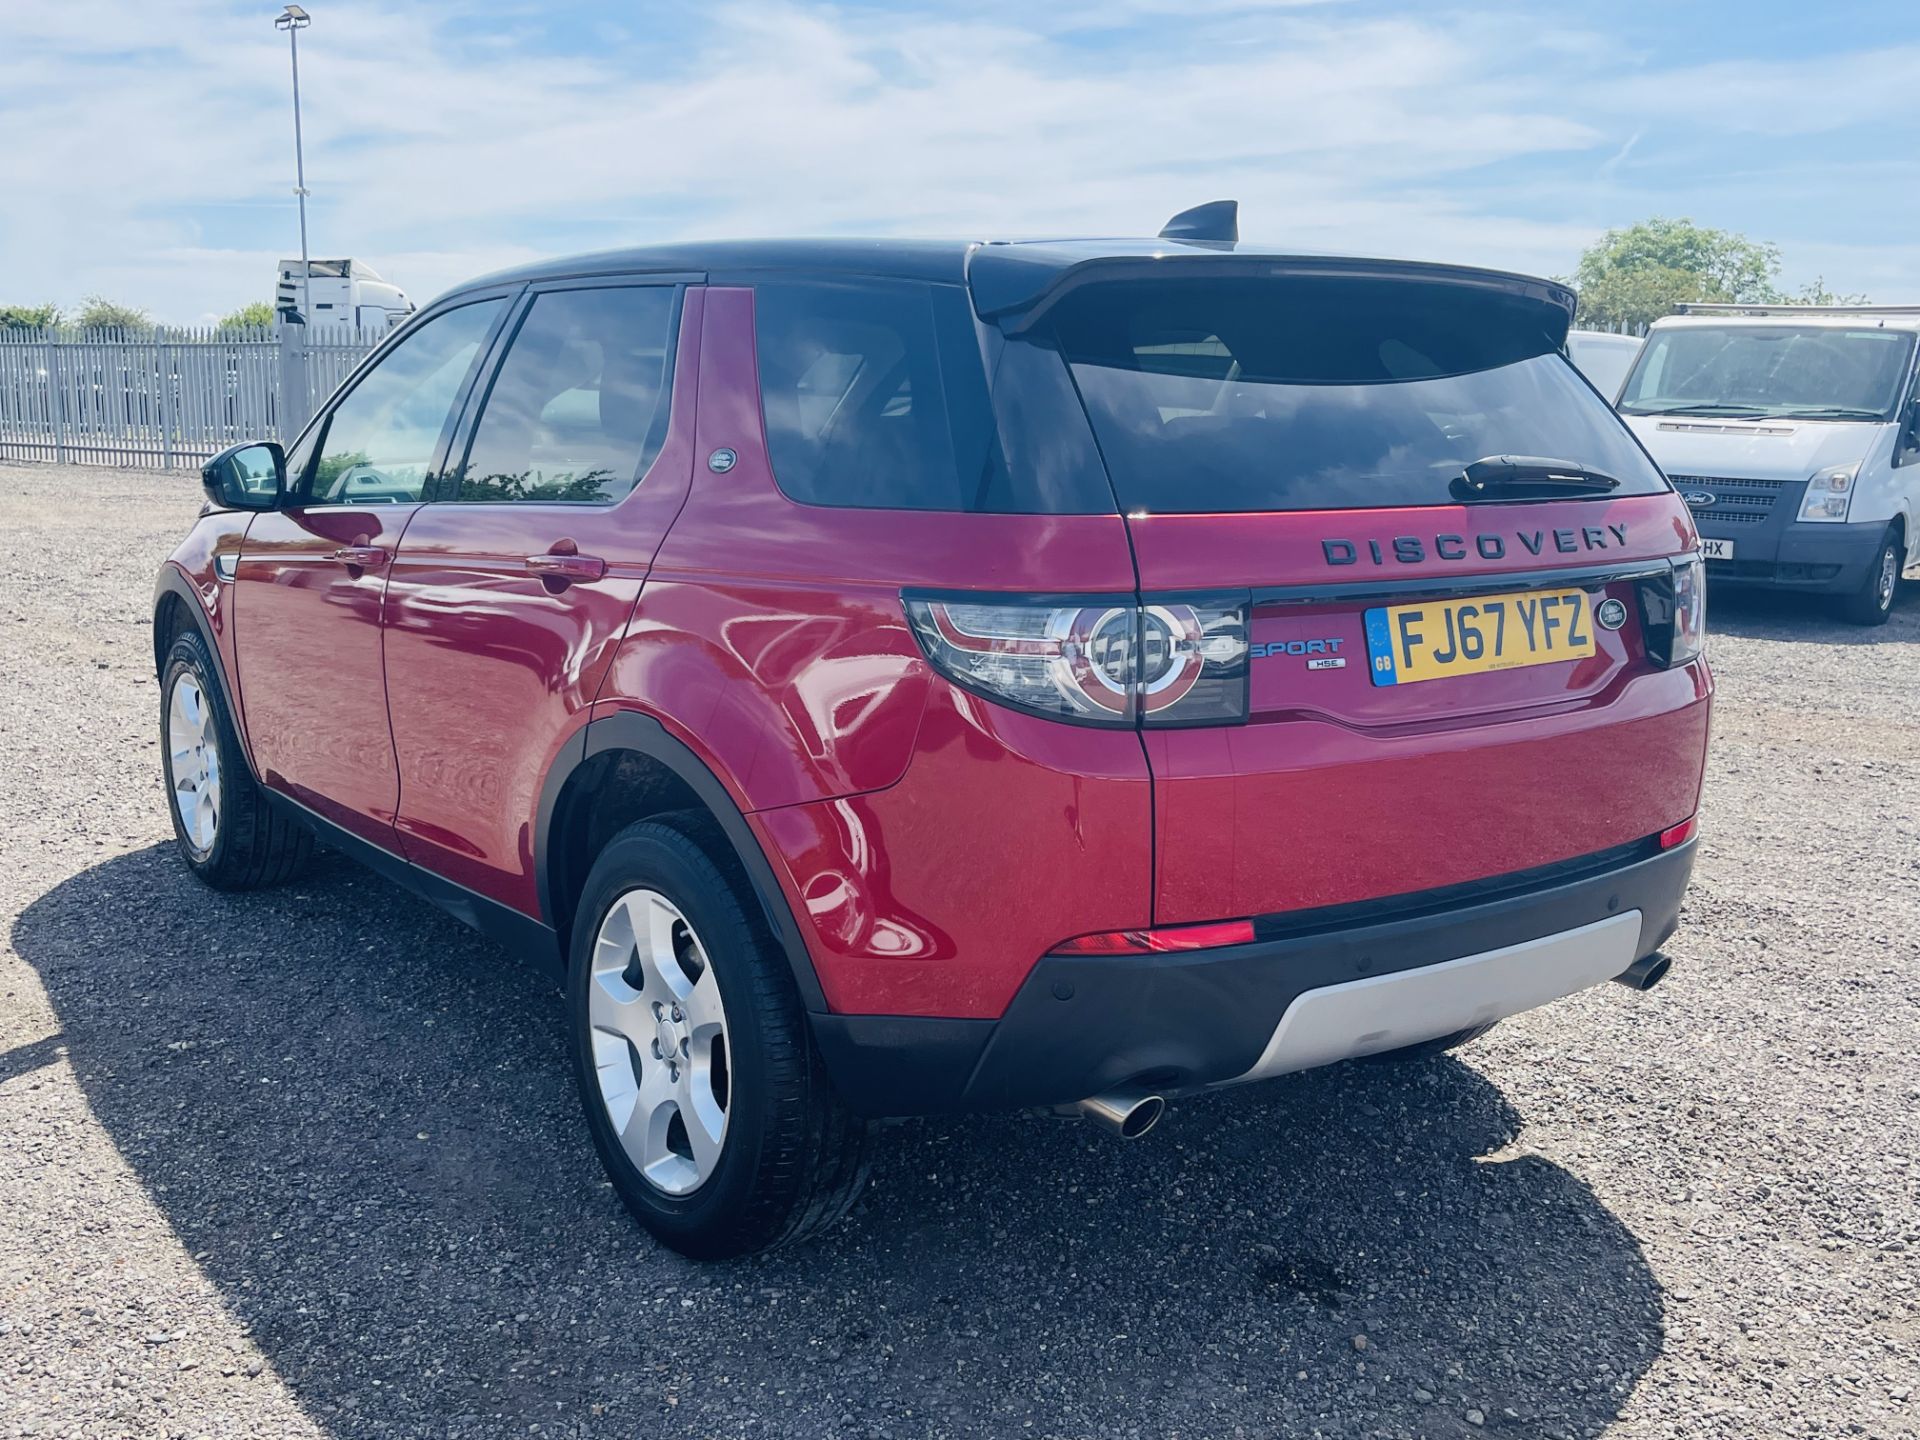 Land Rover Discovery Sport HSE 2.0 ED4 2017 '67 Reg' Sat Nav - Panoramic Glass Roof - ULEZ Compliant - Image 8 of 33